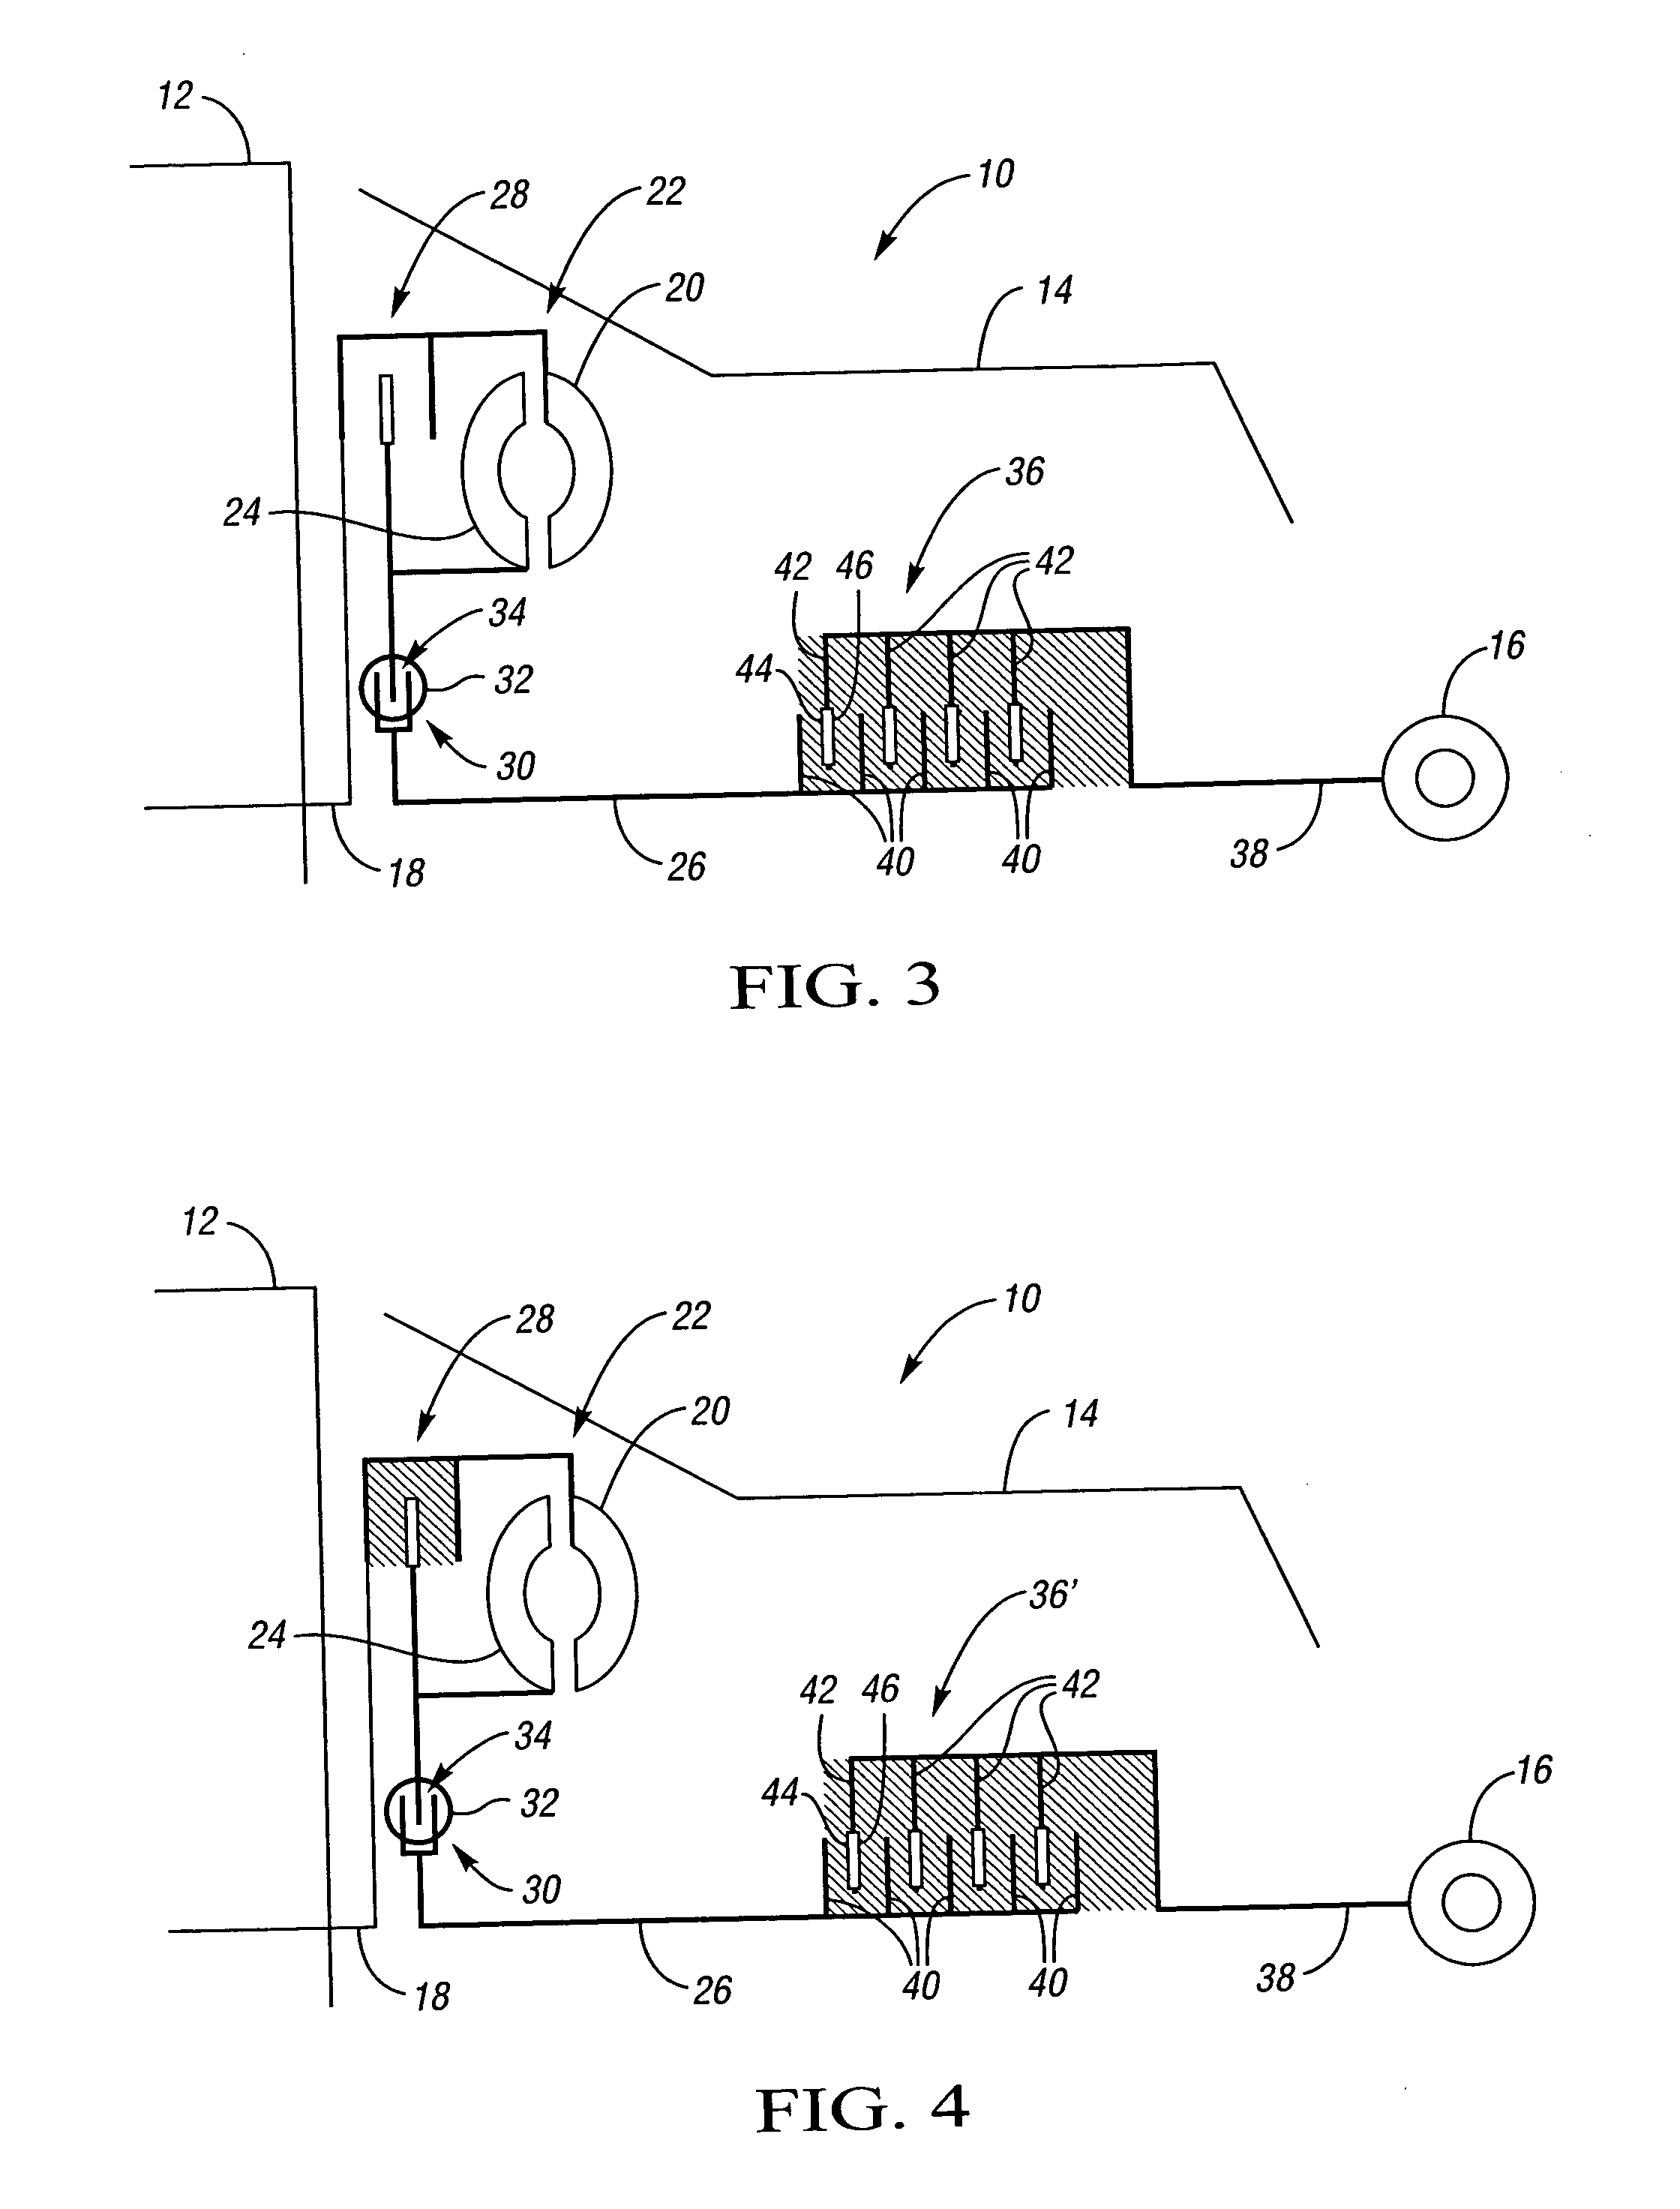 Mechanism and method of controlling an automatic shifting power transmission to effect a first gear launch